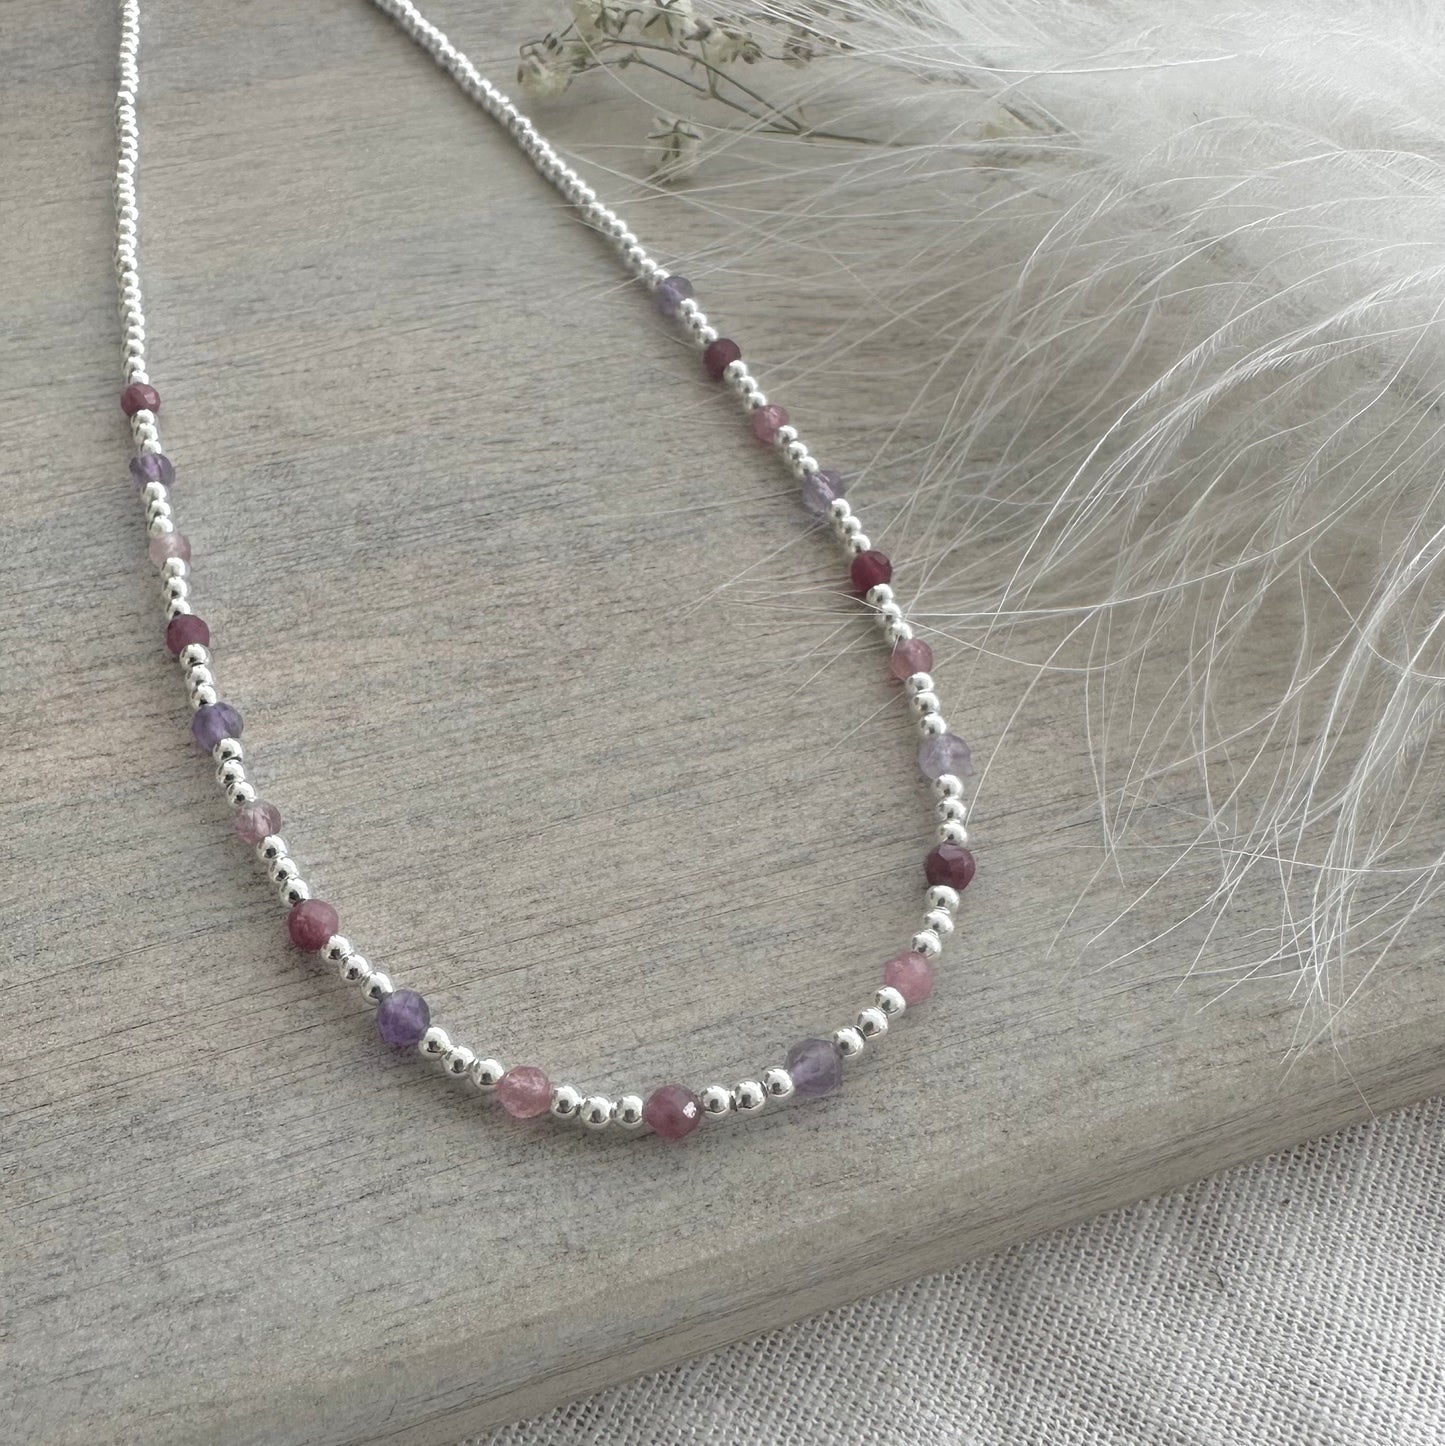 Beautiful gemstone and sterling silver colourful necklace, perfect for summer holidays